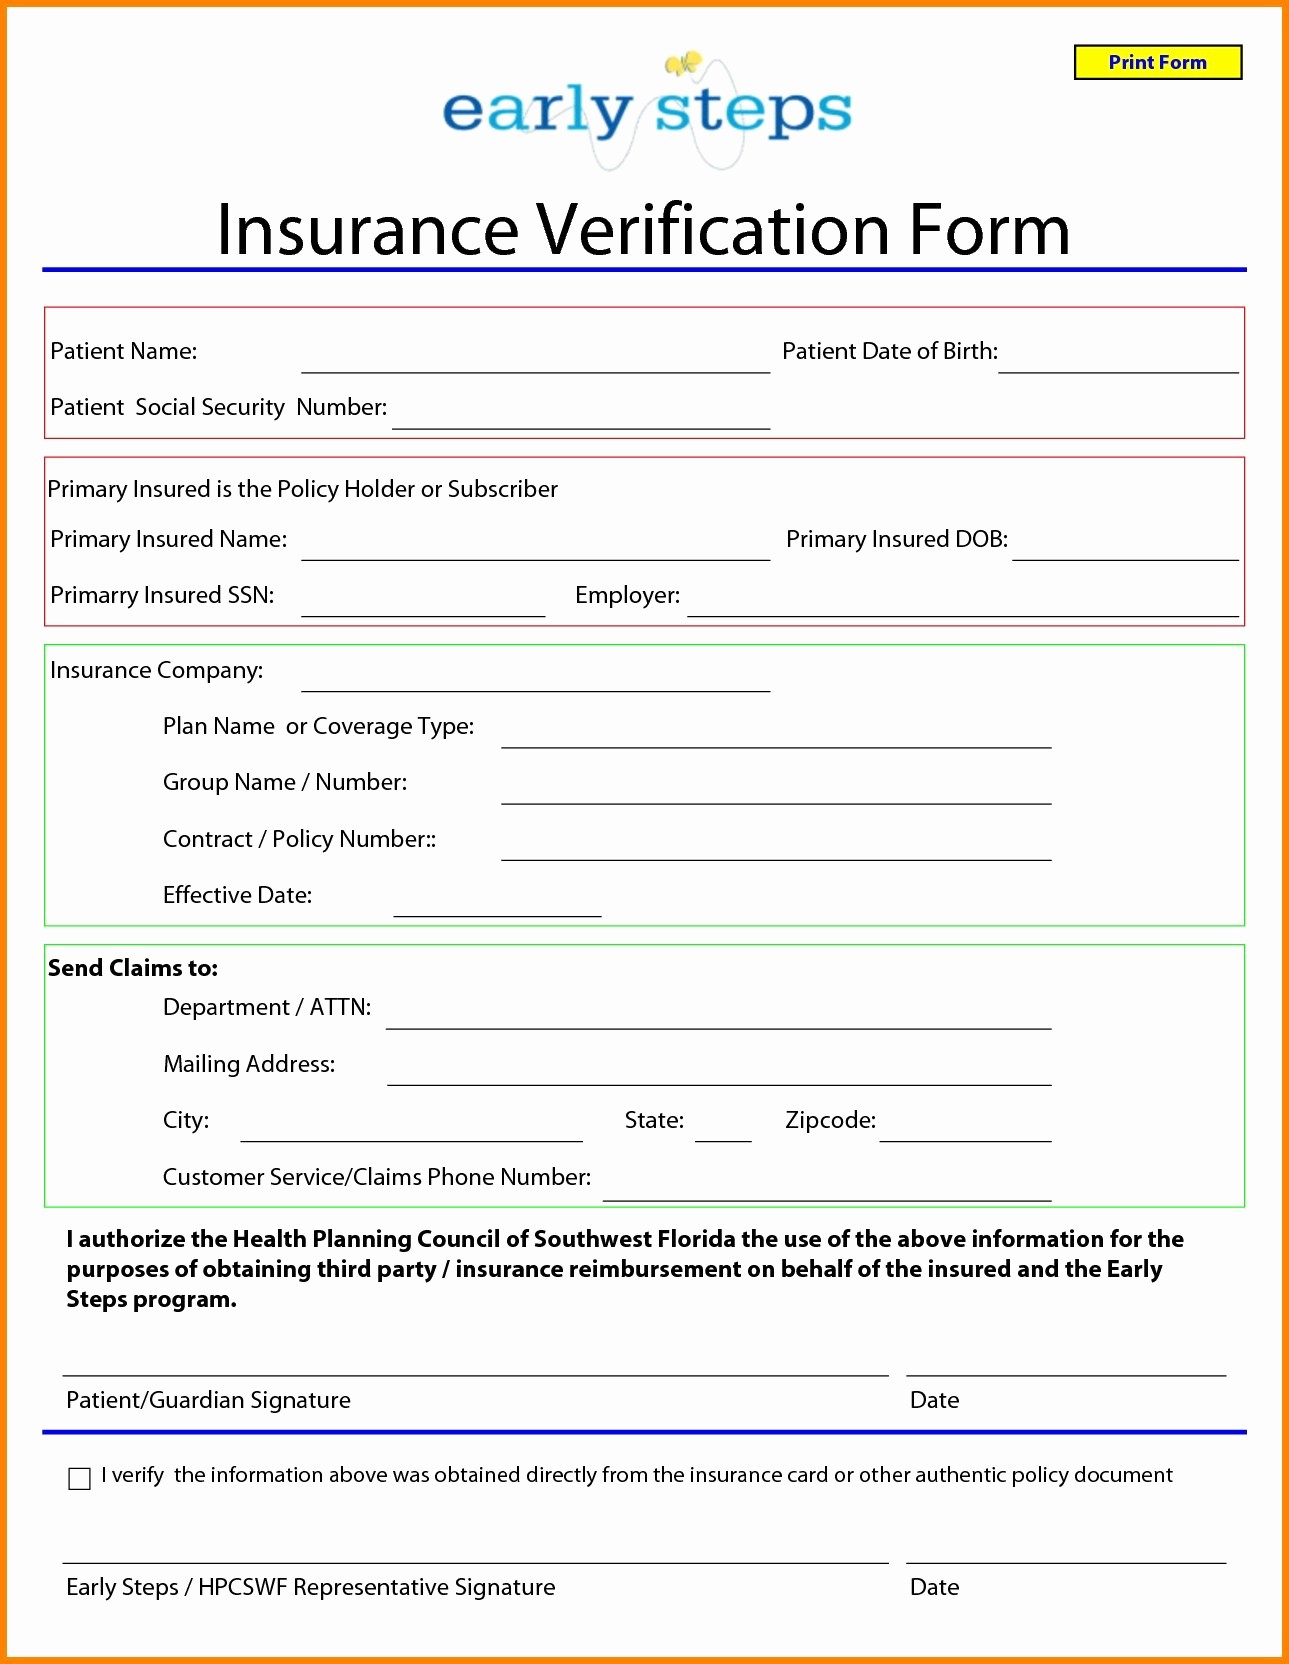 50 Awesome Free Fake Insurance Card Maker DOCUMENTS IDEAS Document